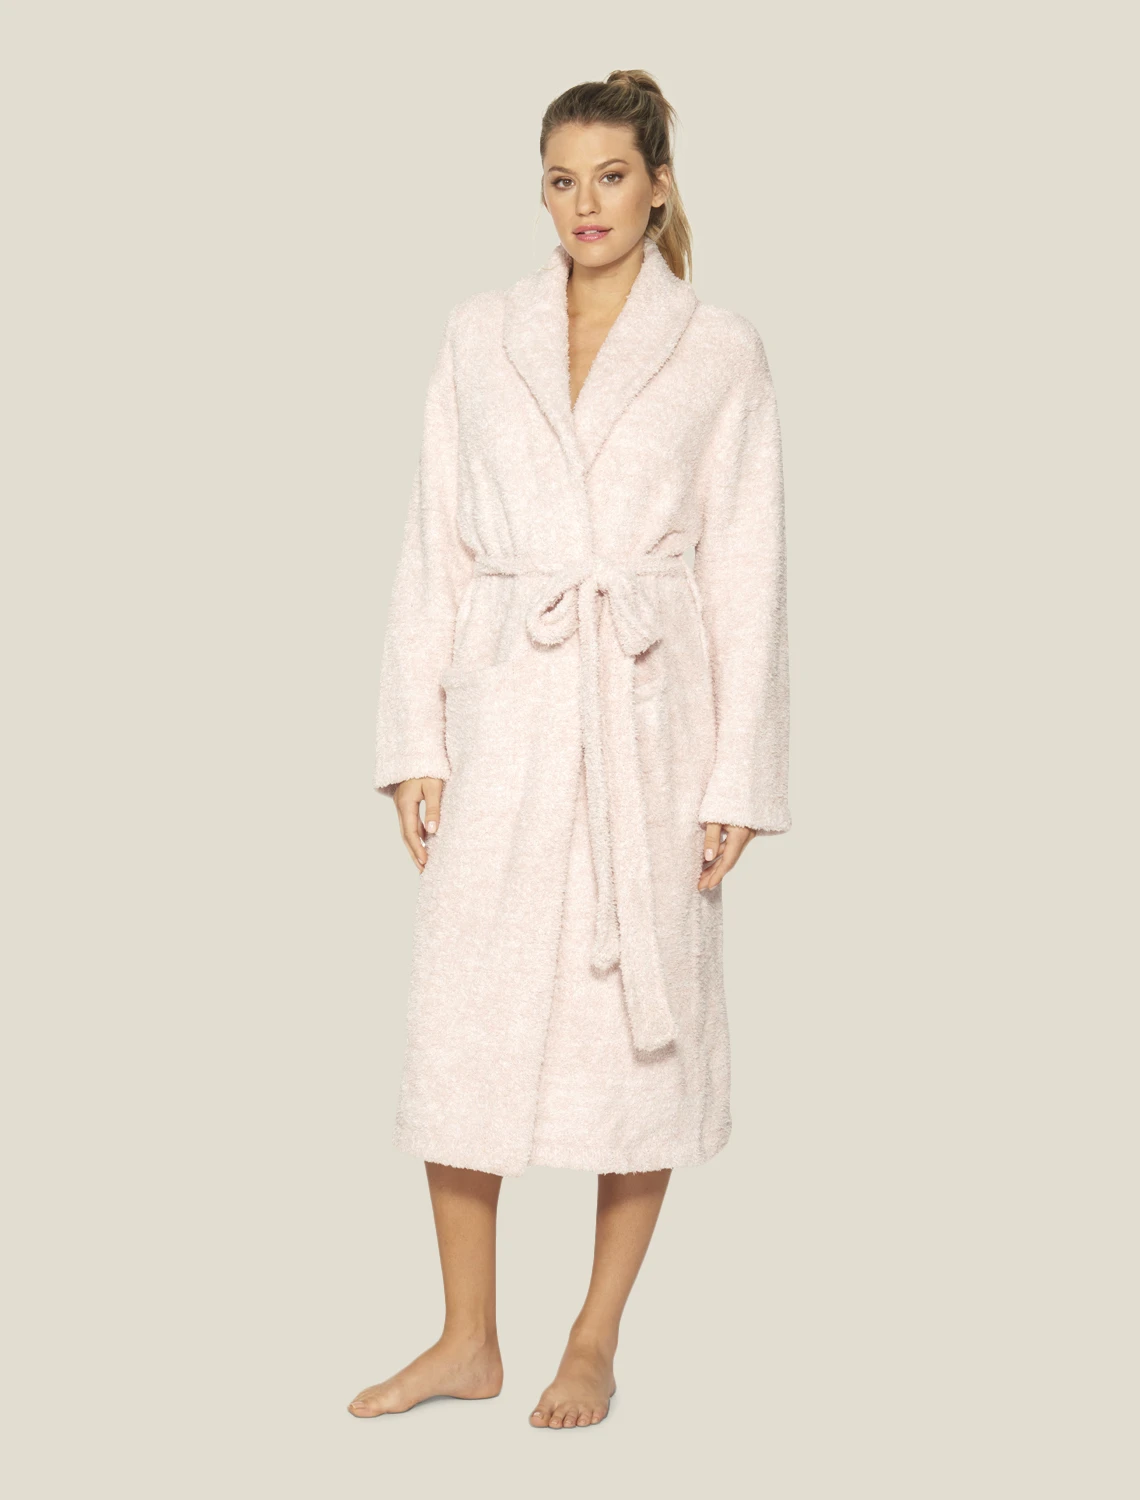 Barefoot Dreams - CozyChic® Heathered Adult Robe - He Dusty Rose / White